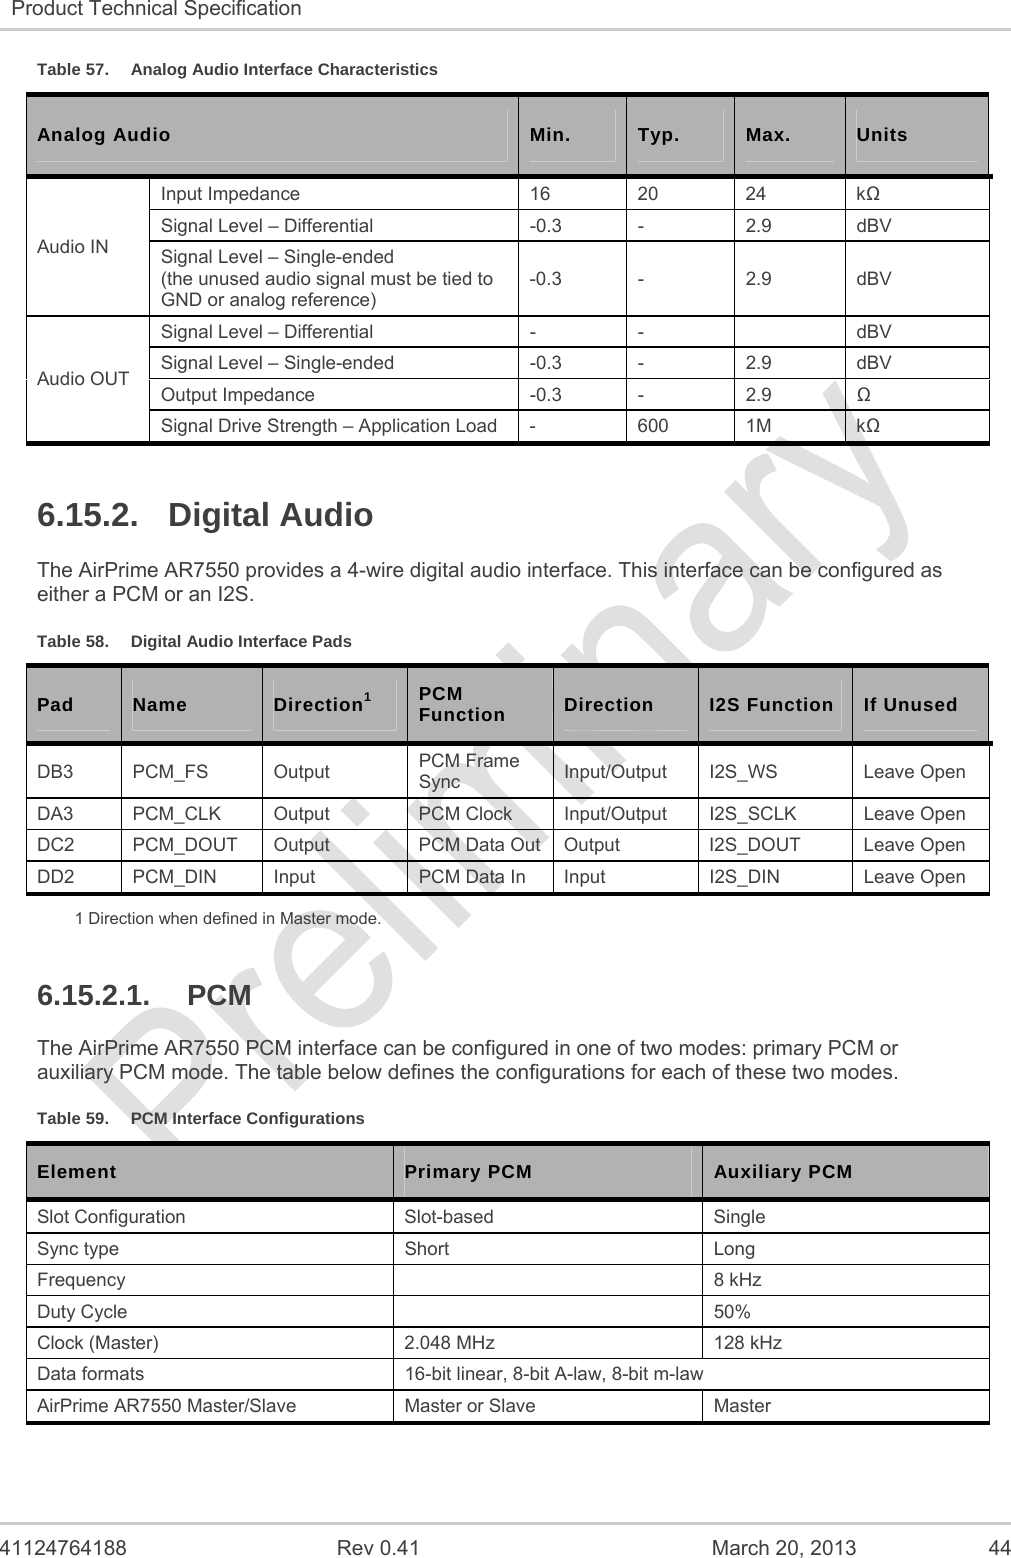   41124764188  Rev 0.41  March 20, 2013  44 Product Technical Specification   Table 57.  Analog Audio Interface Characteristics Analog Audio  Min.  Typ.  Max.  Units Audio IN Input Impedance  16 20 24  k Signal Level – Differential  -0.3  -  2.9  dBV Signal Level – Single-ended (the unused audio signal must be tied to GND or analog reference) -0.3 -  2.9  dBV Audio OUT Signal Level – Differential  -  -    dBV Signal Level – Single-ended  -0.3  -  2.9  dBV Output Impedance  -0.3  -  2.9   Signal Drive Strength – Application Load  -  600  1M  k 6.15.2. Digital Audio The AirPrime AR7550 provides a 4-wire digital audio interface. This interface can be configured as either a PCM or an I2S. Table 58.  Digital Audio Interface Pads Pad  Name  Direction1 PCM Function  Direction  I2S Function  If Unused DB3 PCM_FS  Output  PCM Frame Sync  Input/Output I2S_WS  Leave Open DA3 PCM_CLK Output  PCM Clock Input/Output I2S_SCLK  Leave Open DC2 PCM_DOUT Output  PCM Data Out Output  I2S_DOUT  Leave Open DD2  PCM_DIN  Input  PCM Data In  Input  I2S_DIN  Leave Open 1 Direction when defined in Master mode. 6.15.2.1. PCM The AirPrime AR7550 PCM interface can be configured in one of two modes: primary PCM or auxiliary PCM mode. The table below defines the configurations for each of these two modes. Table 59.  PCM Interface Configurations Element  Primary PCM  Auxiliary PCM Slot Configuration  Slot-based  Single Sync type  Short  Long Frequency   8 kHz Duty Cycle    50% Clock (Master)  2.048 MHz  128 kHz Data formats  16-bit linear, 8-bit A-law, 8-bit m-law AirPrime AR7550 Master/Slave  Master or Slave  Master 